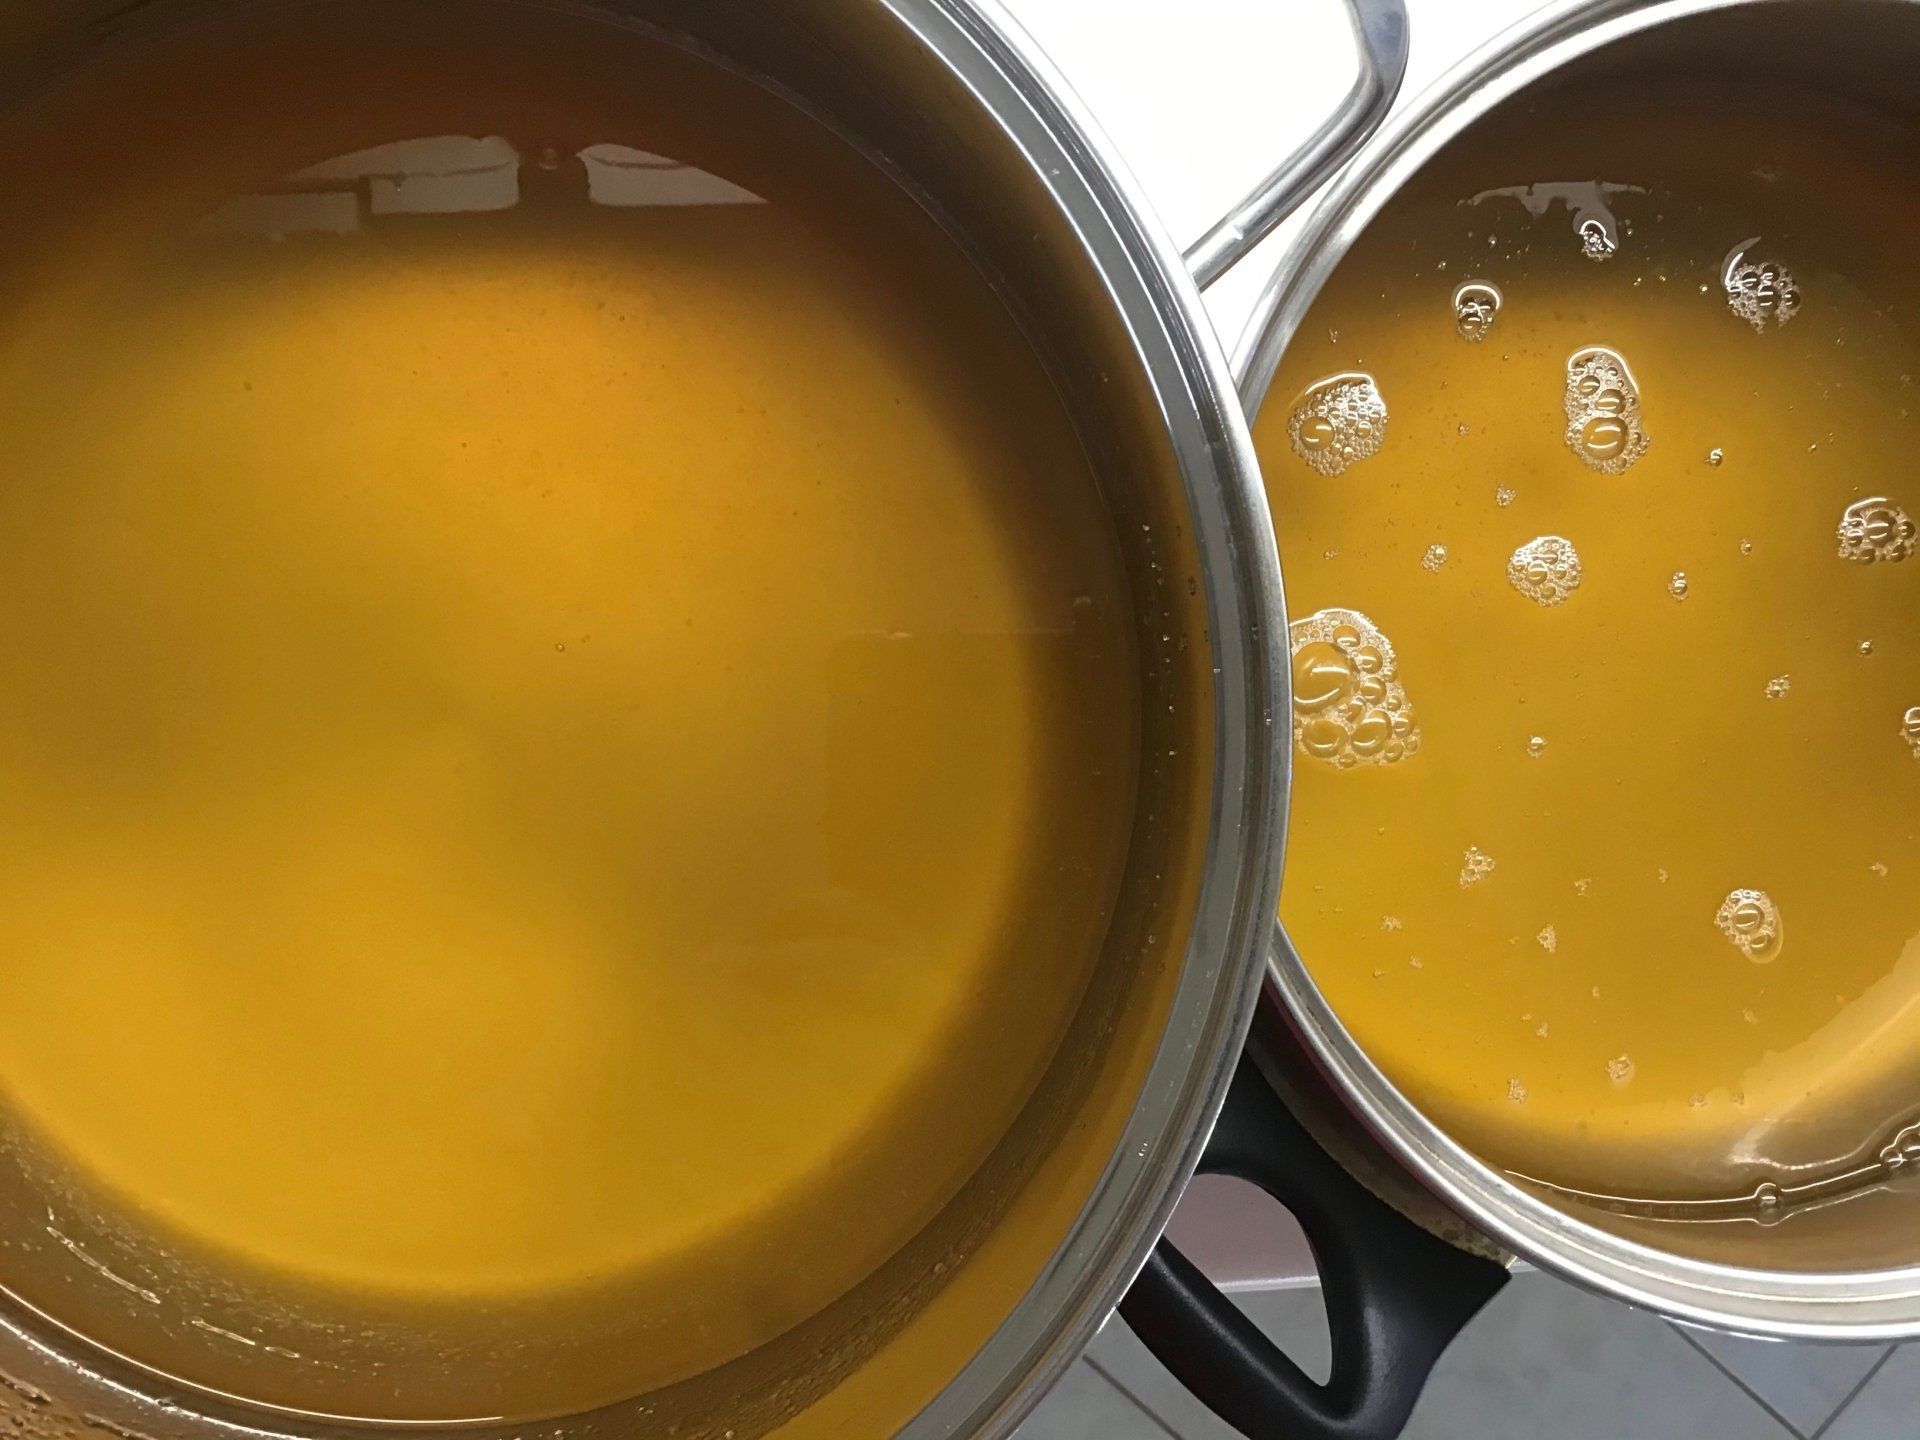 Too much to boil - use two pans and boil in batches. Making marmalade on  Hydra Island.